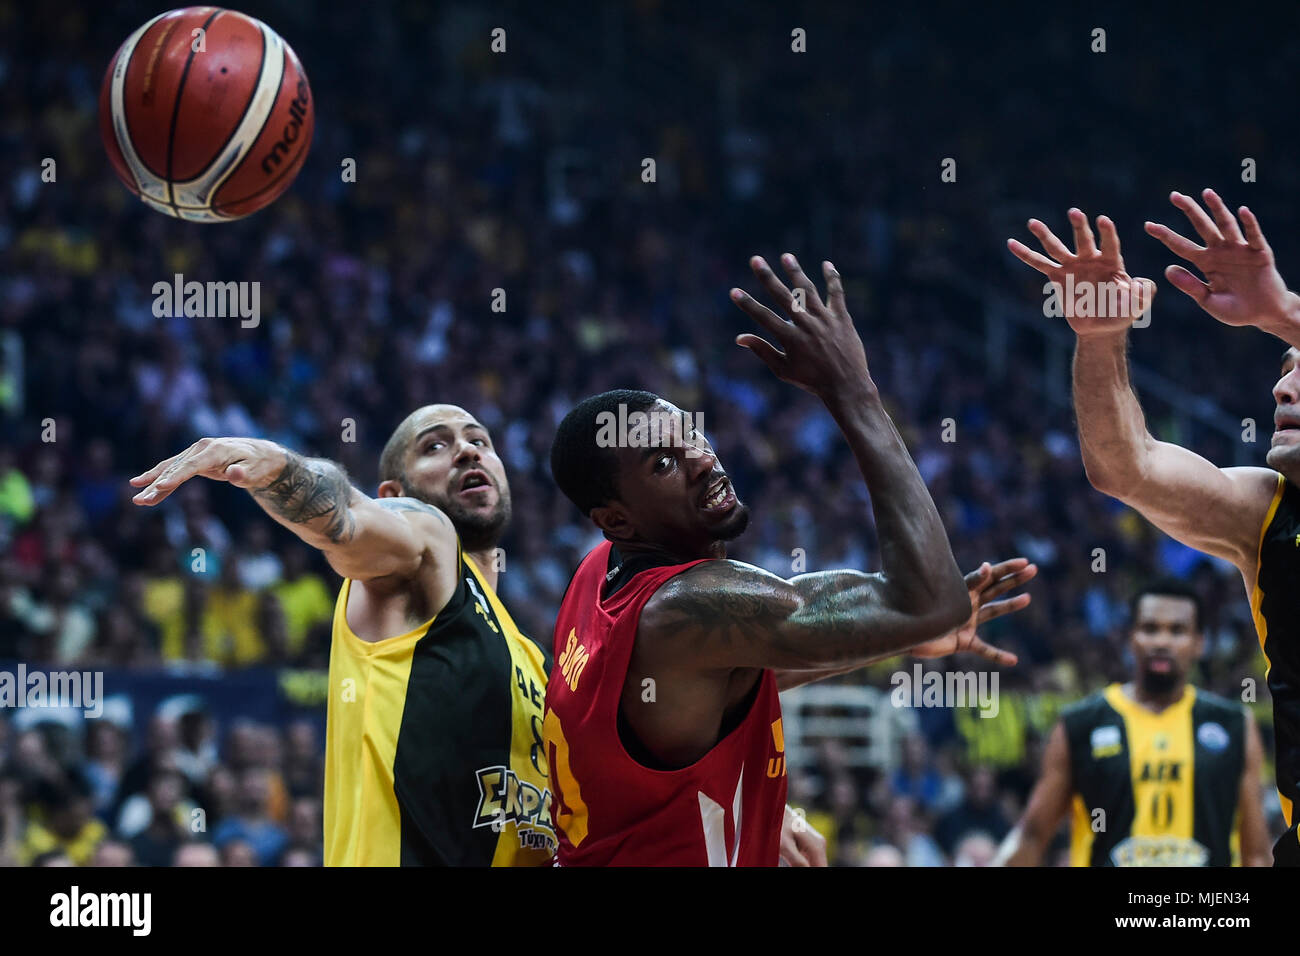 04 May 2018, Greece, Athens: Basketball, Champions Legaue, Final Four,  semi-final, AEK vs UCAM Murcia: Ovie Soko (C) in action in action. Photo:  Angelos Tzortzinis/dpa Photo: Photo: Angelos Tzortzinis/dpa Stock Photo -